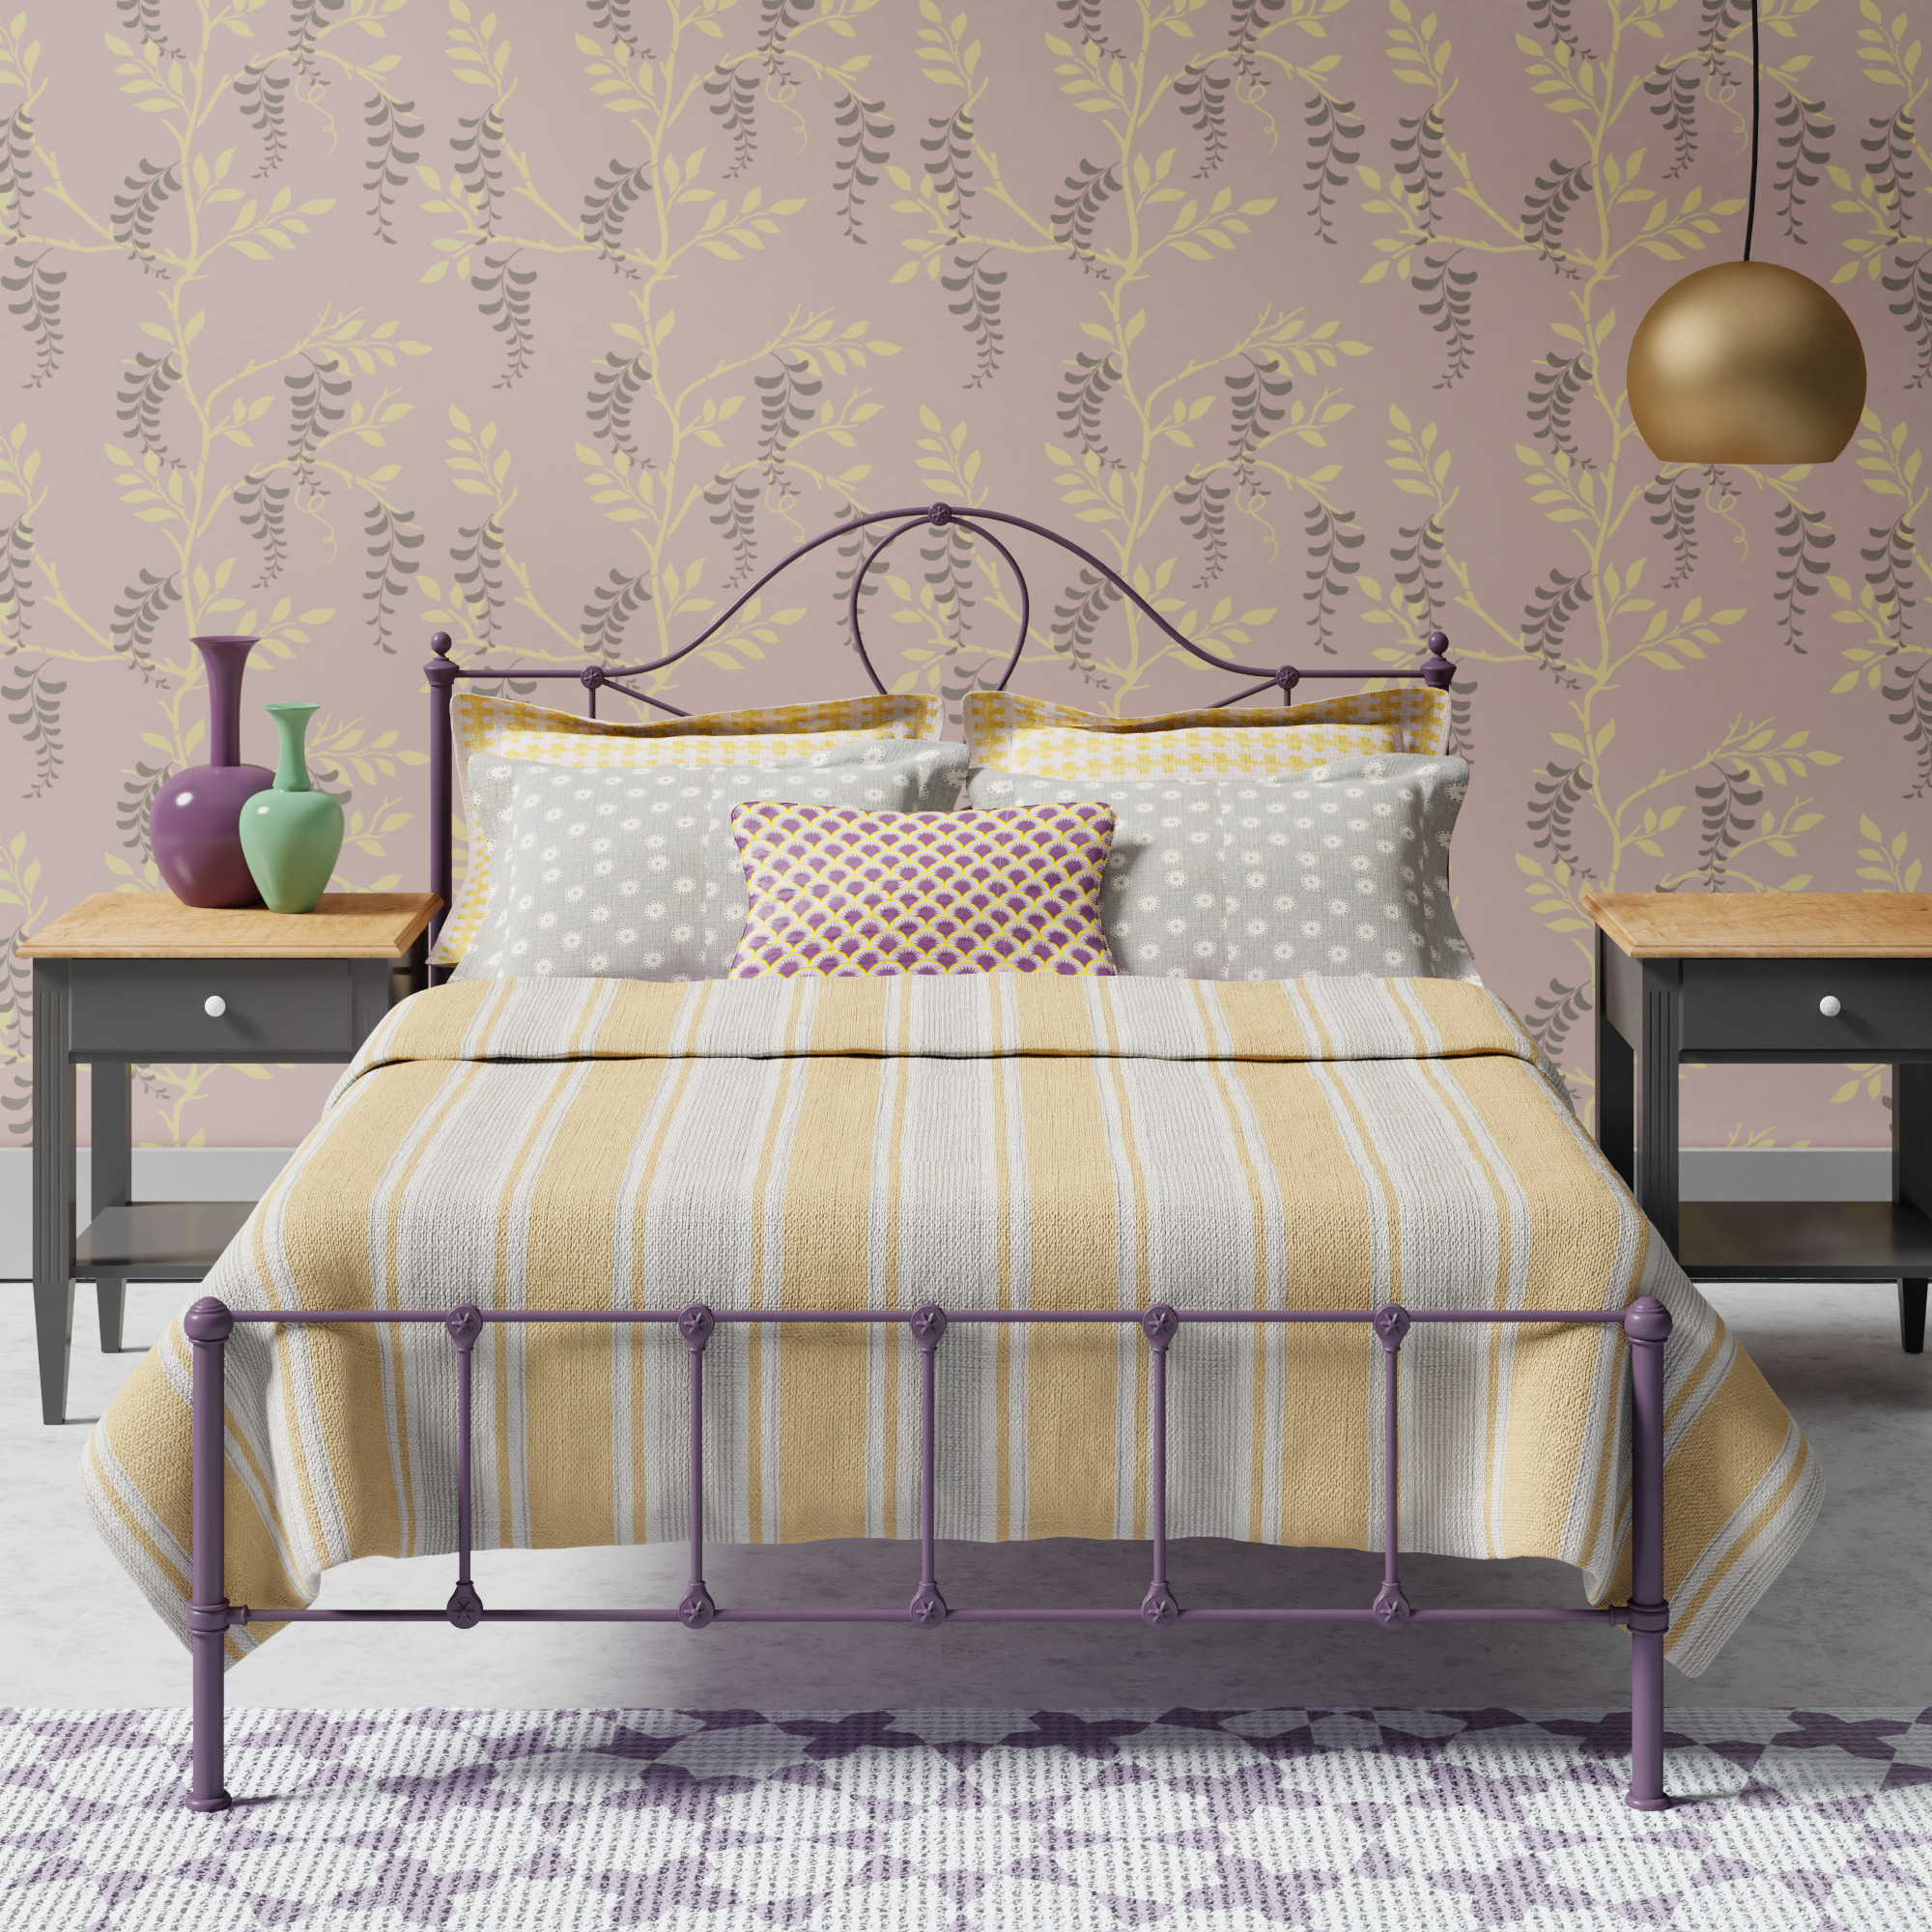 Athena iron bed frame - Lilac bedroom